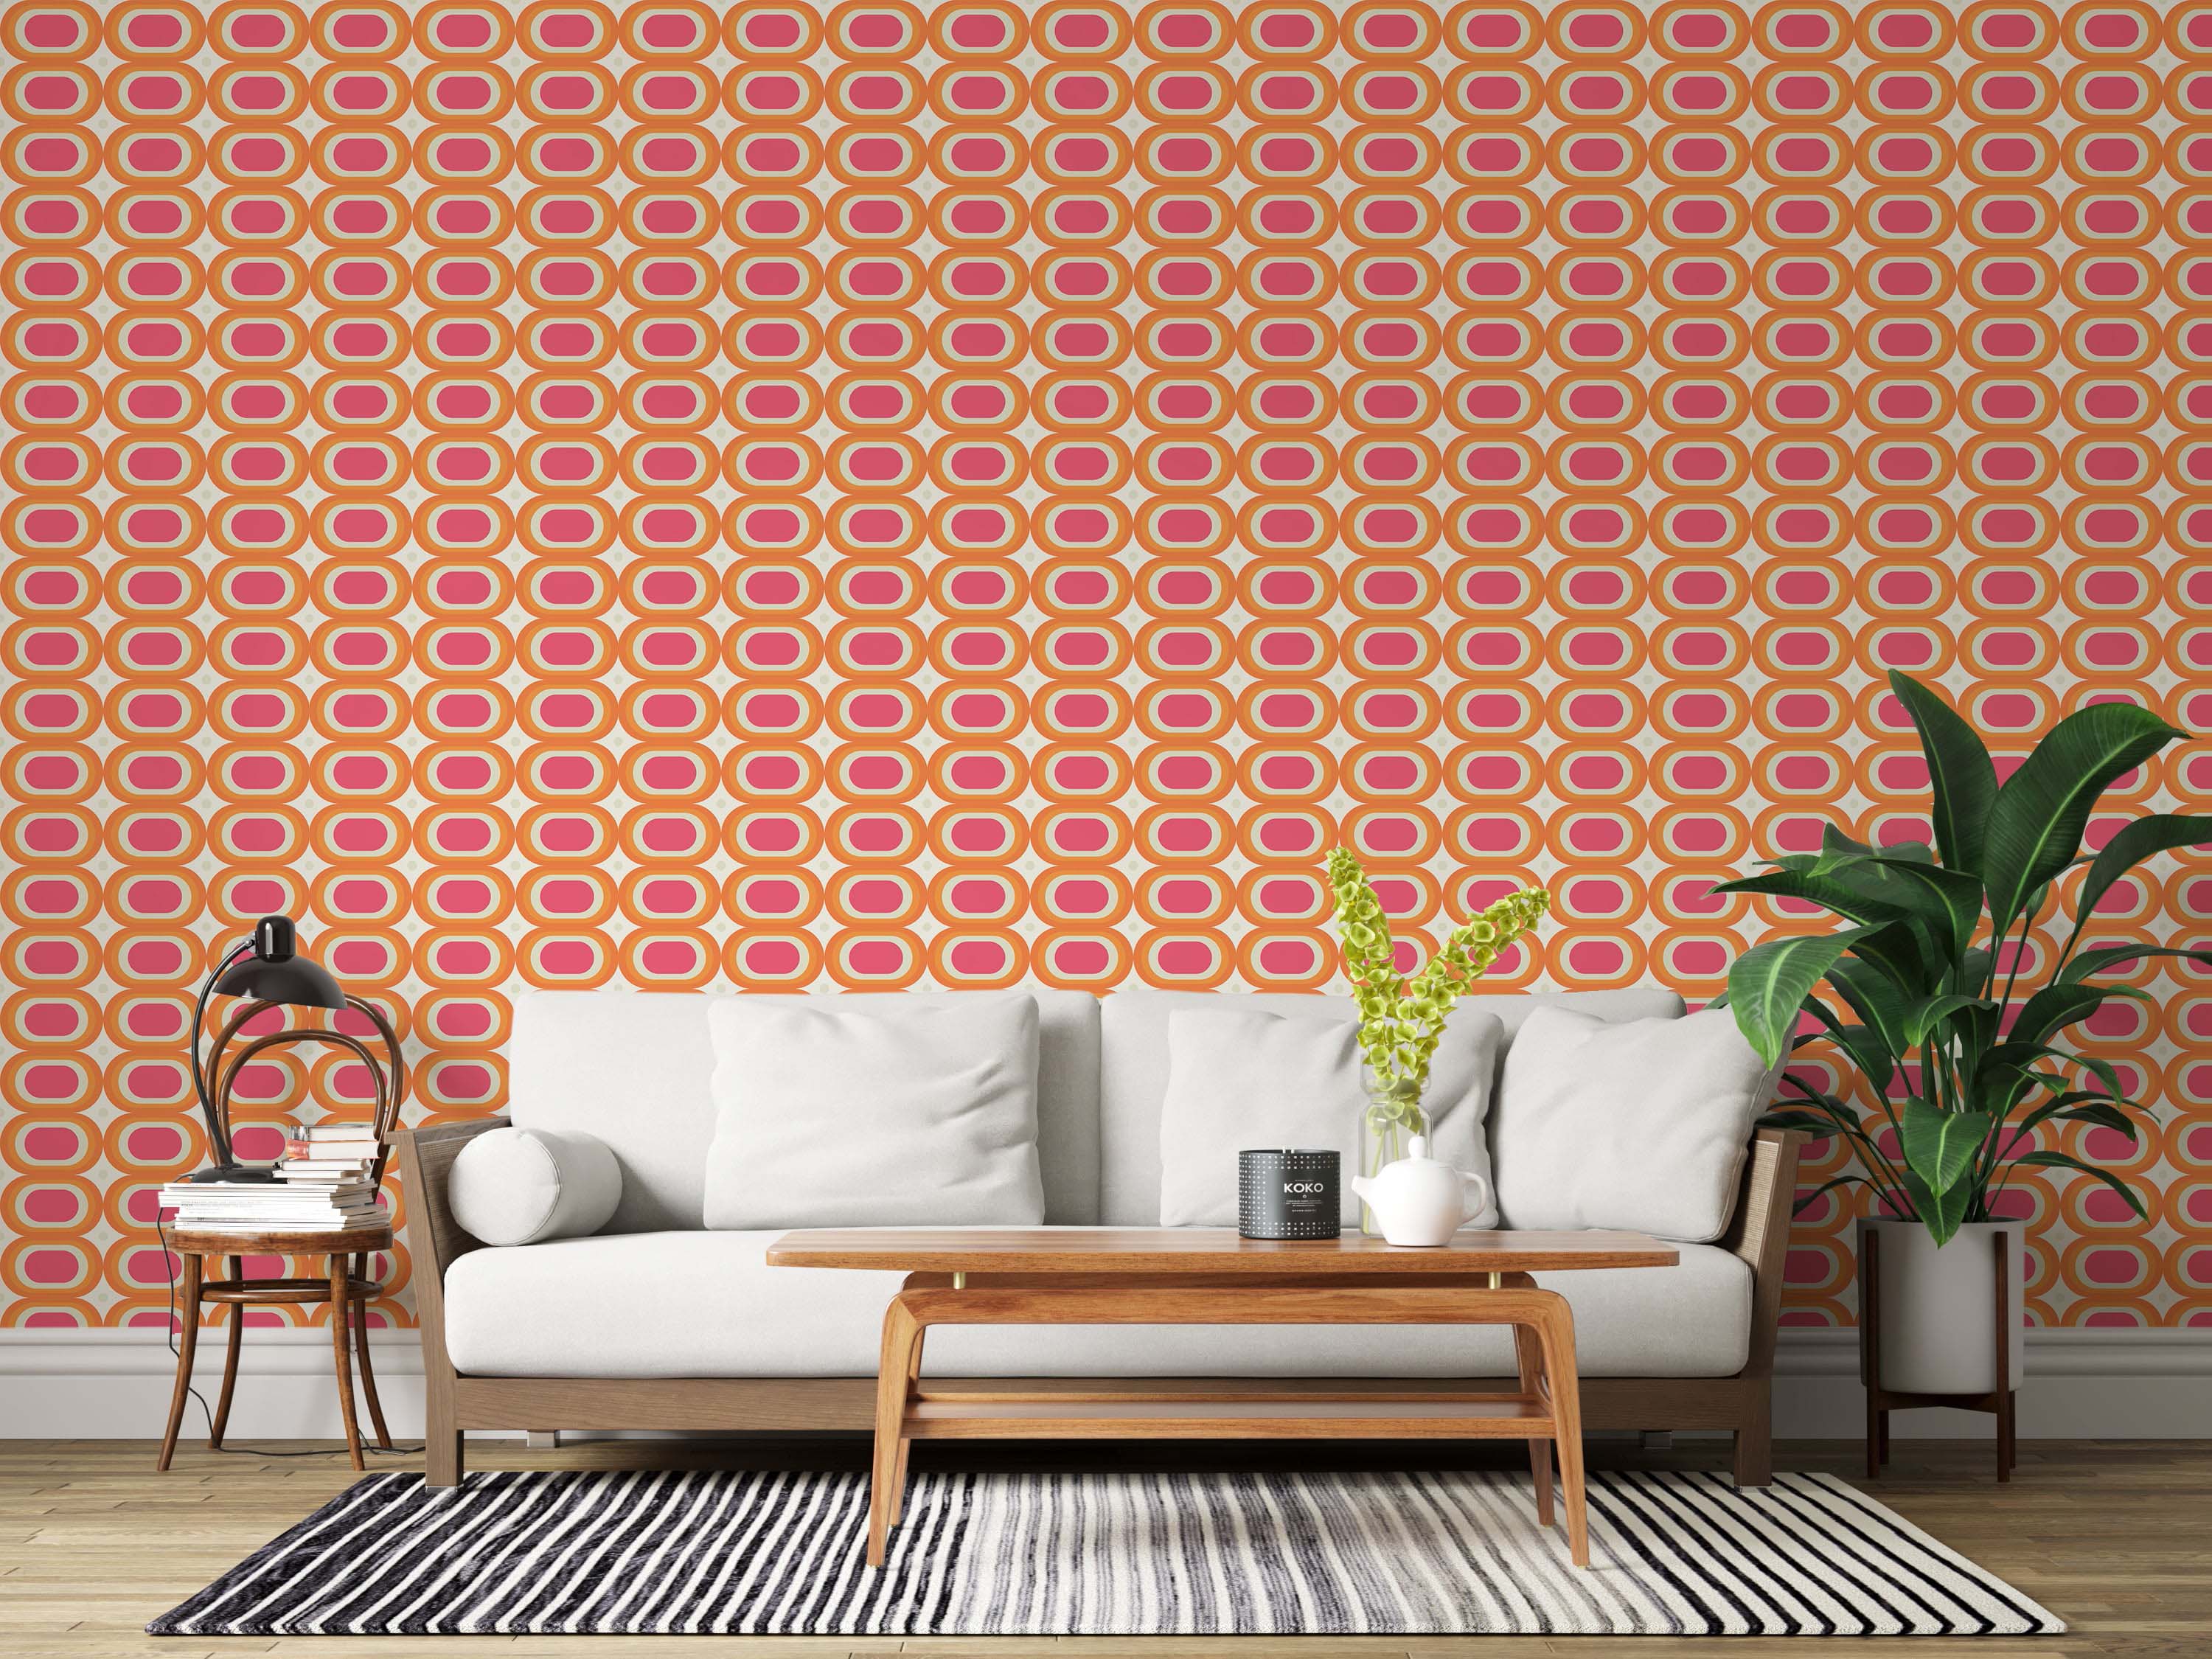 Floral wallpapers inspired by retro 60s wallpapers